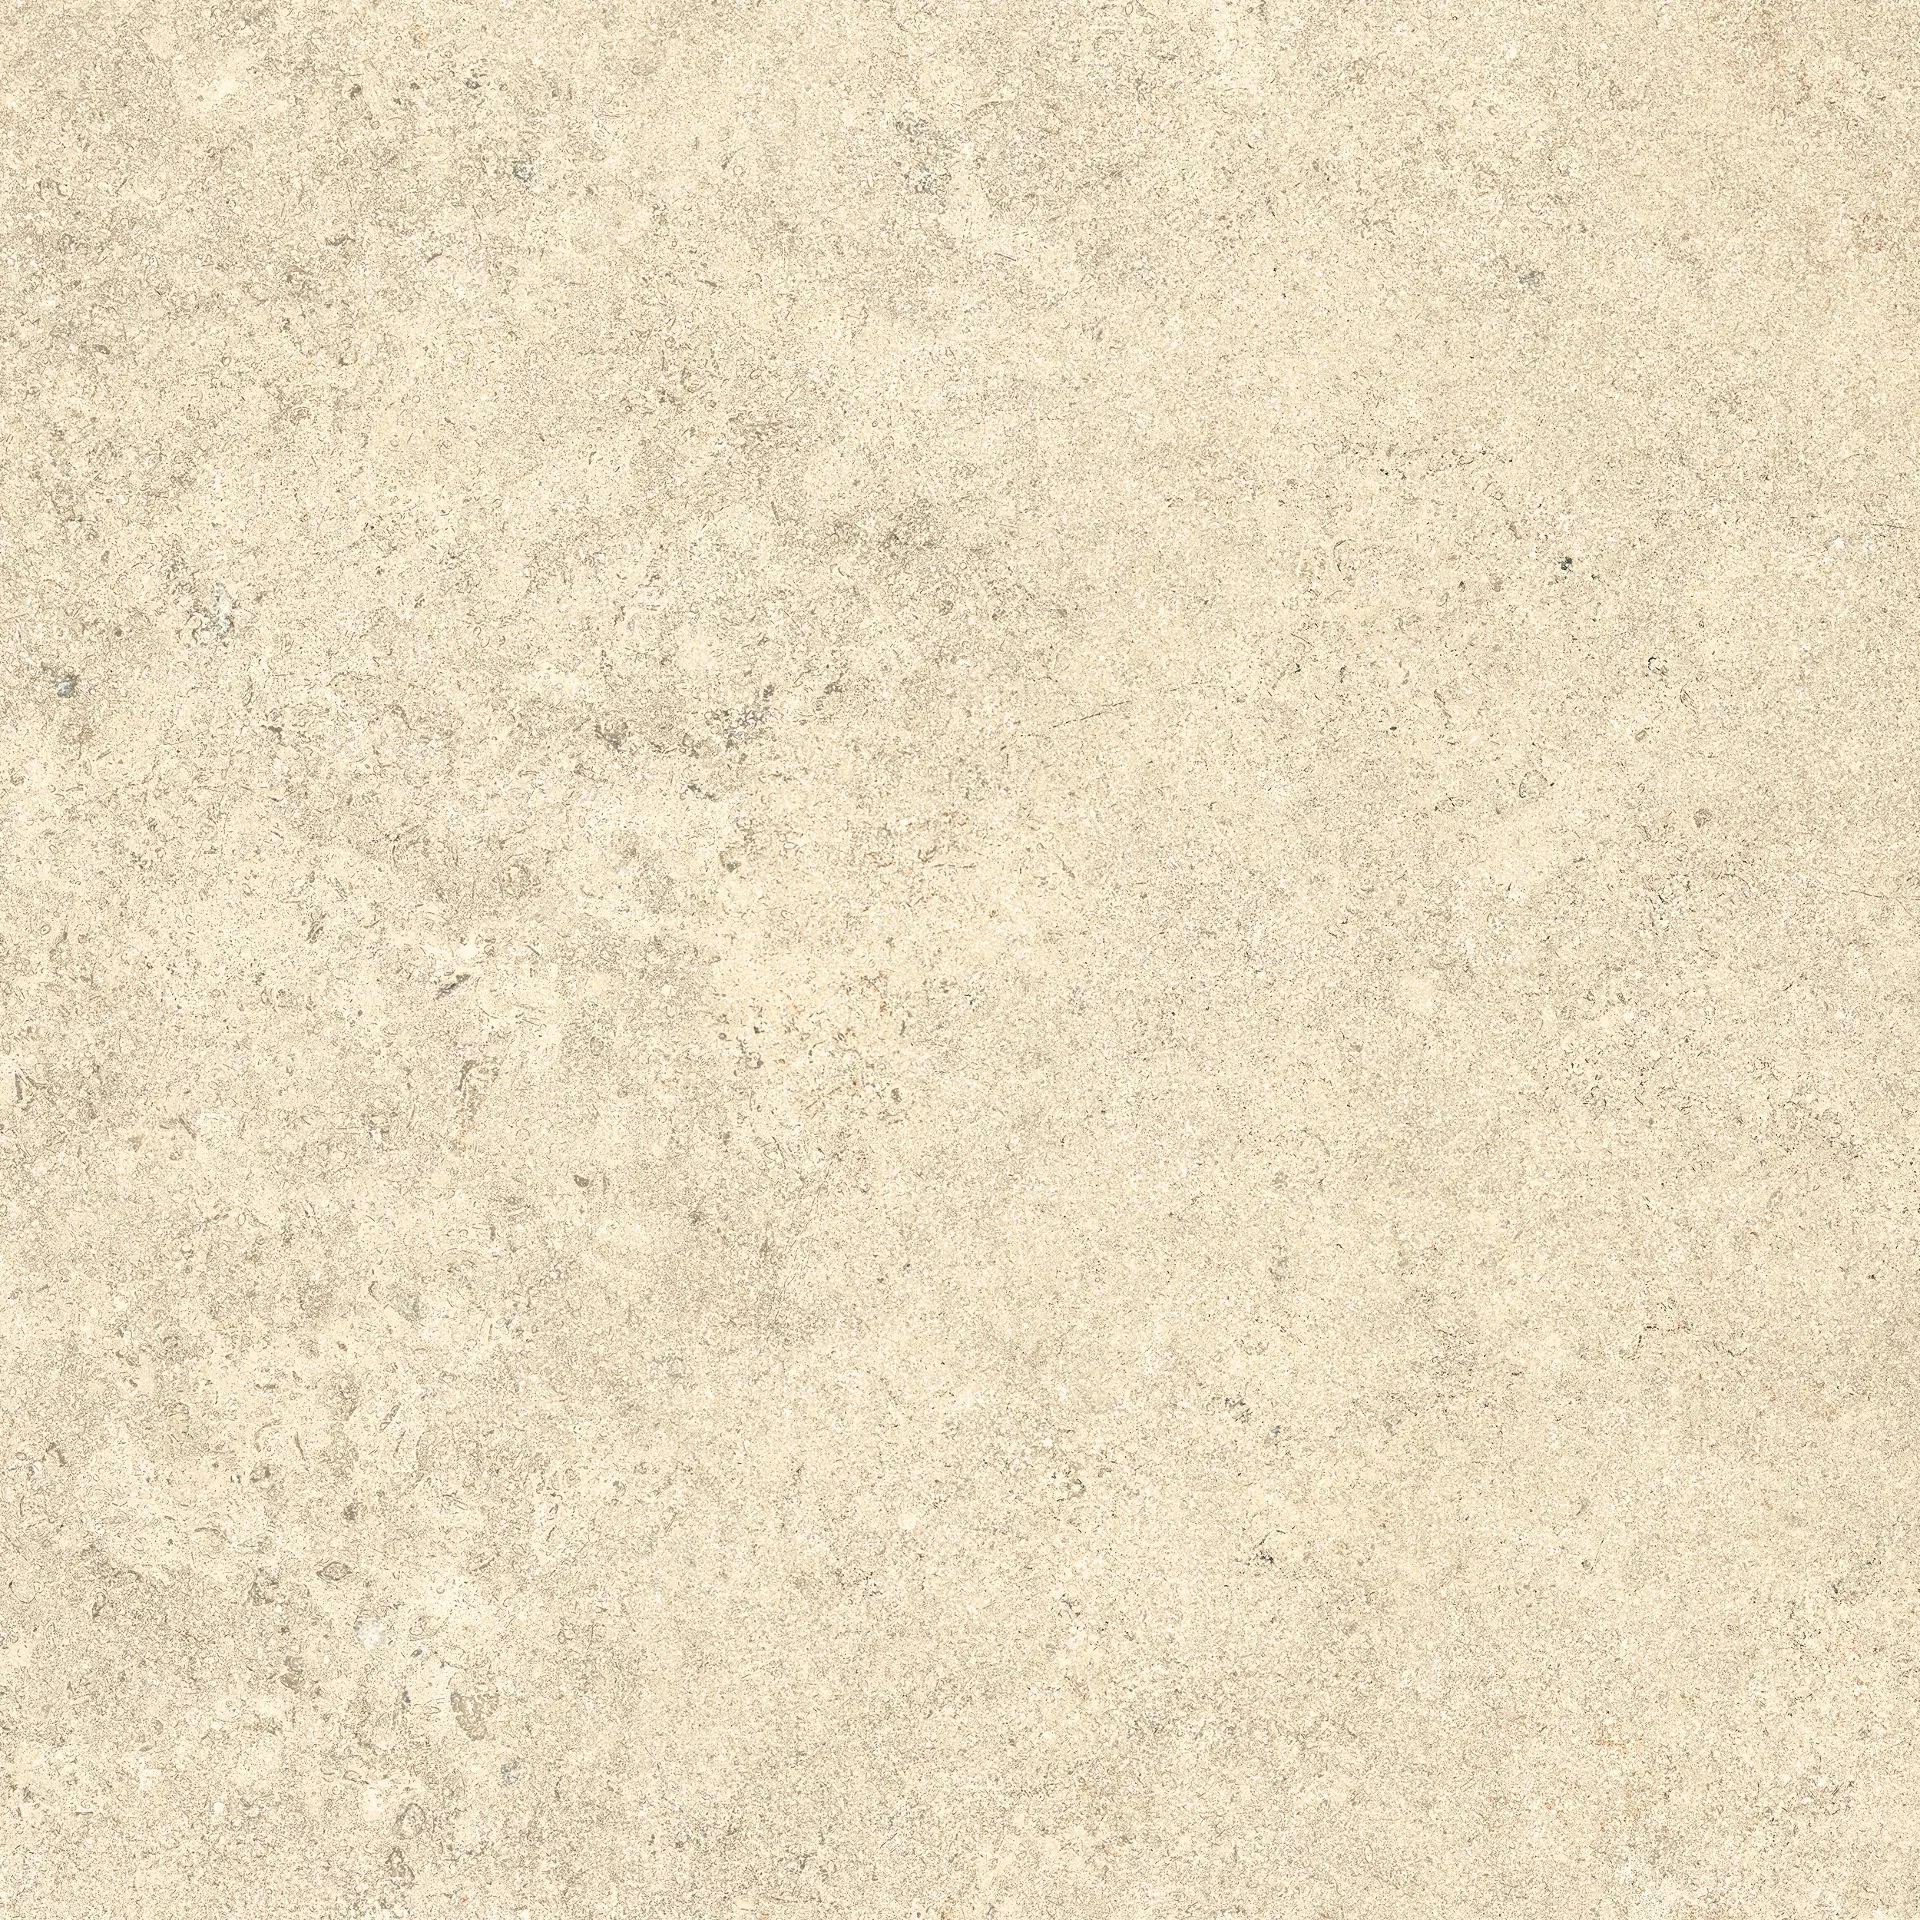 Cottodeste Pura Ivory Rolled Protect EGWPR15 60x60cm rectified 14mm